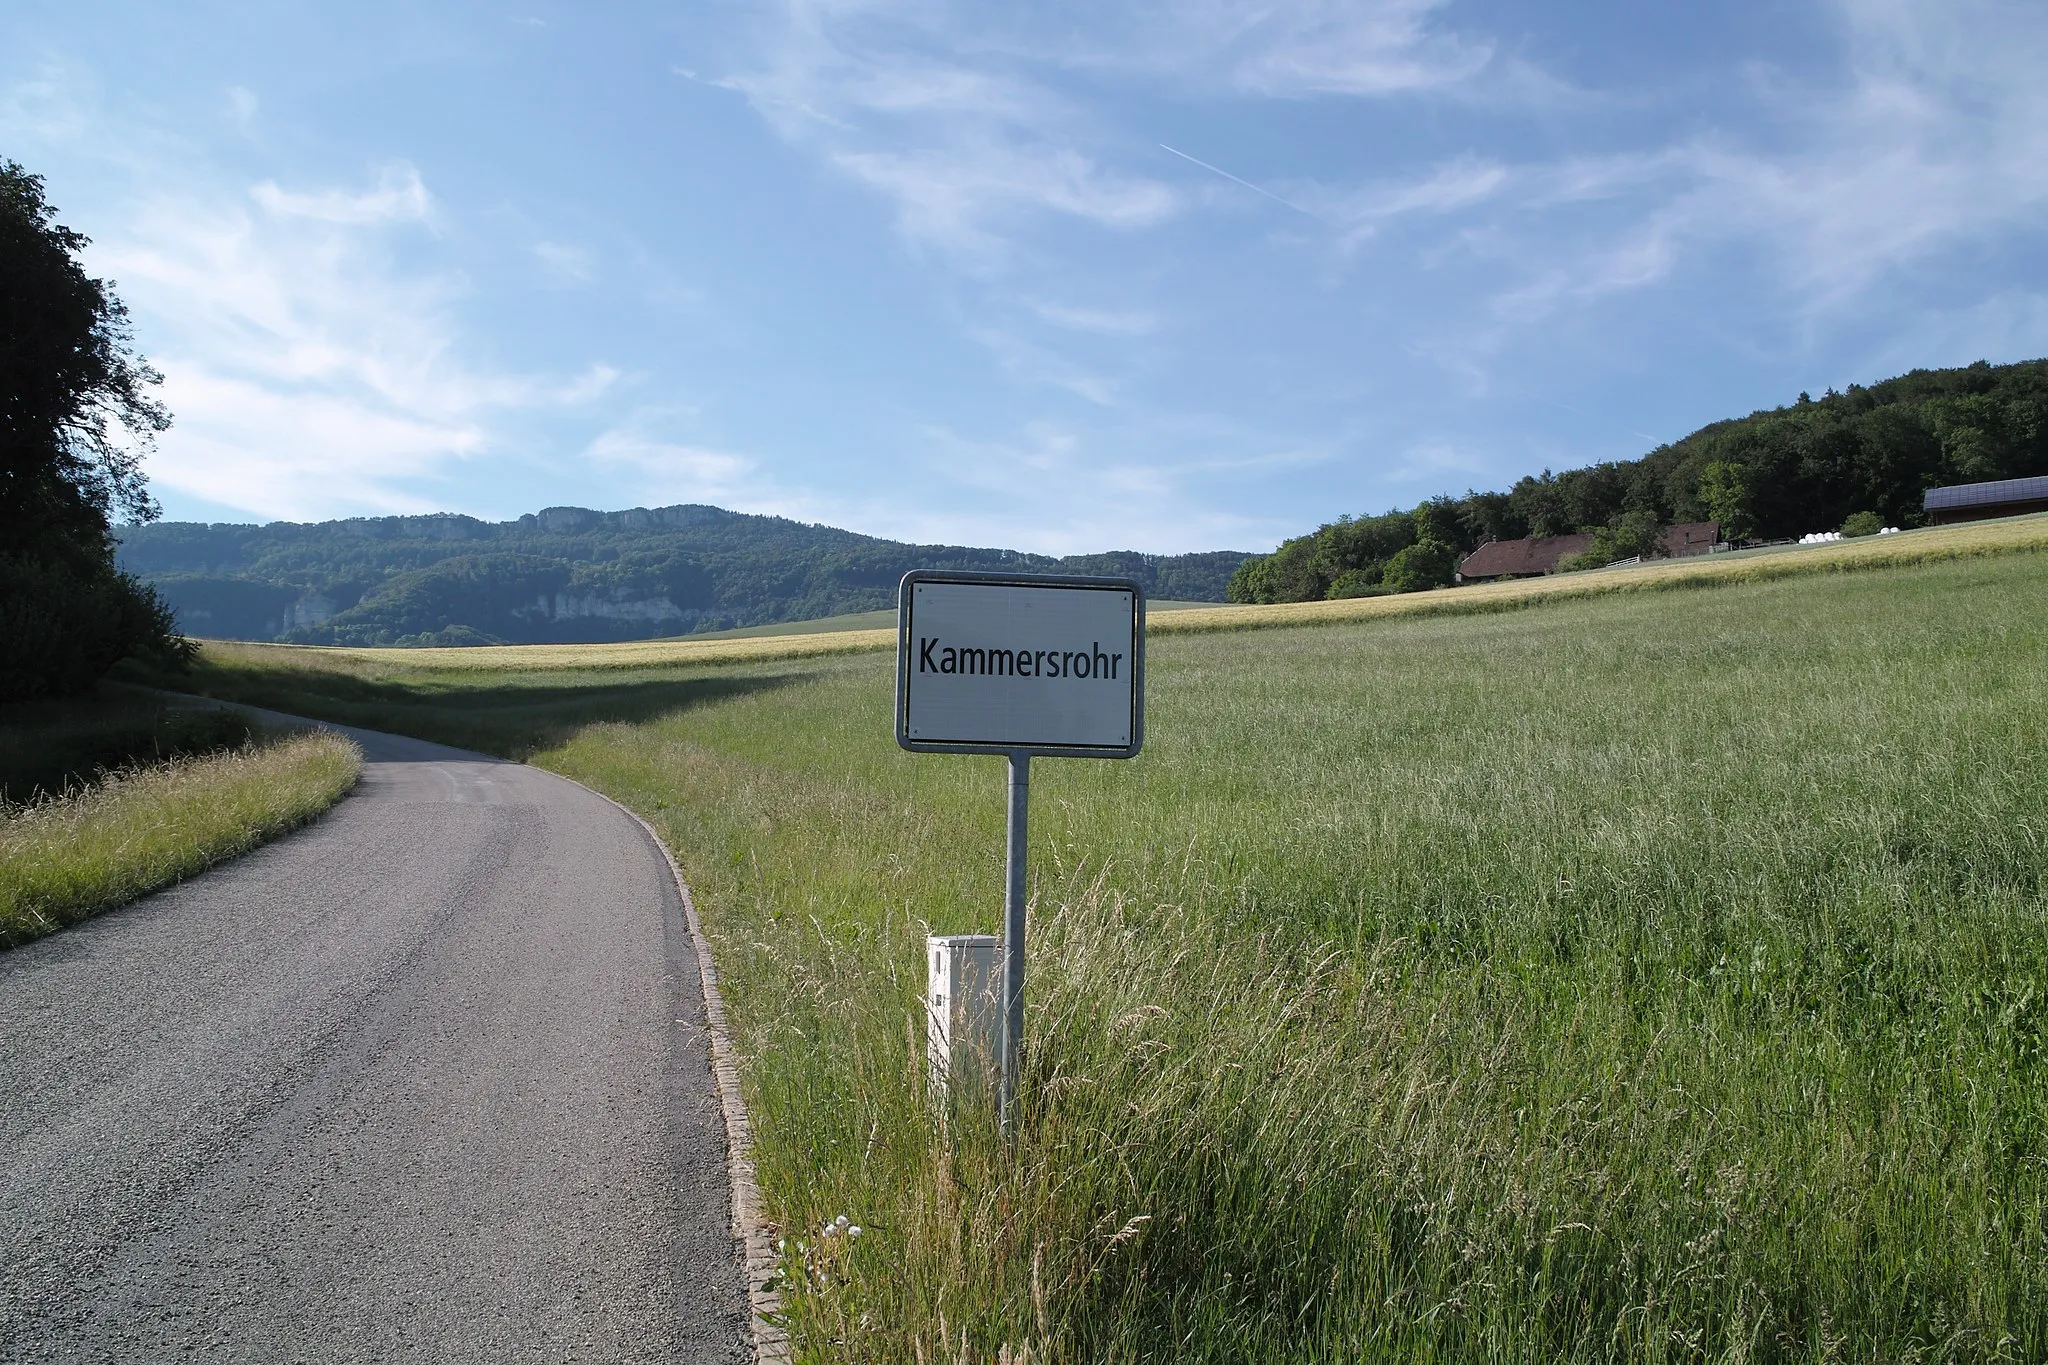 Photo showing: Municipality limit sign of Kammersrohr, canton of Solothurn, Switzerland, on the road from Hubersdorf.